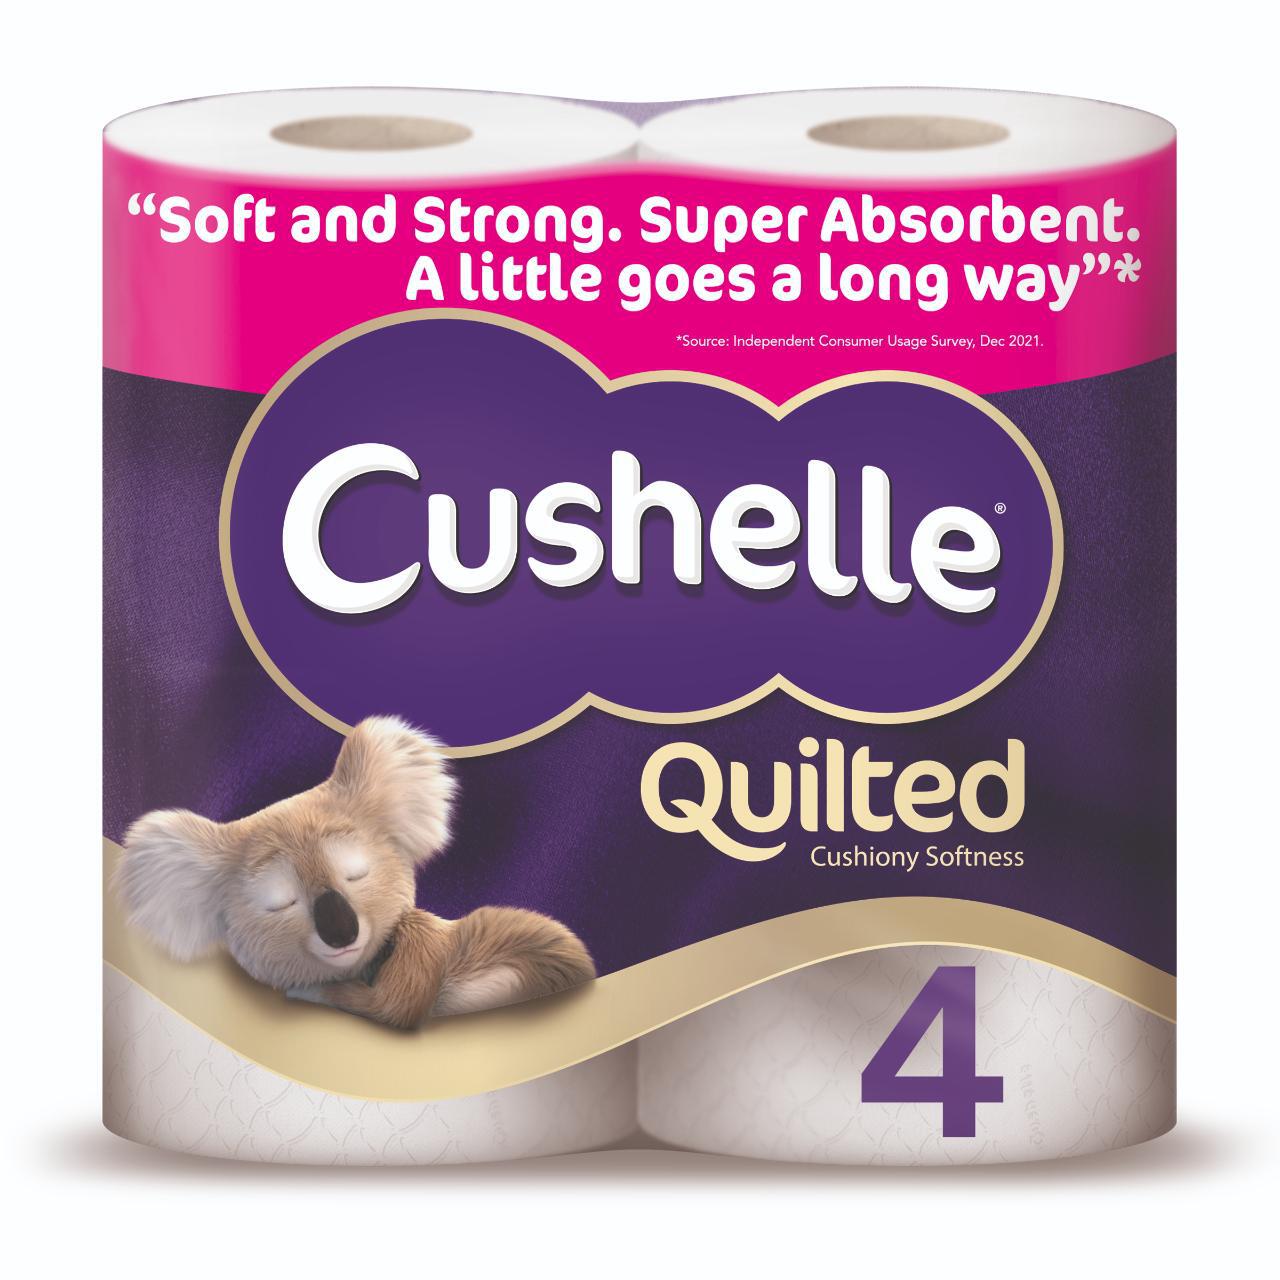 Cushelle Quilted Toilet Rolls 4 per pack